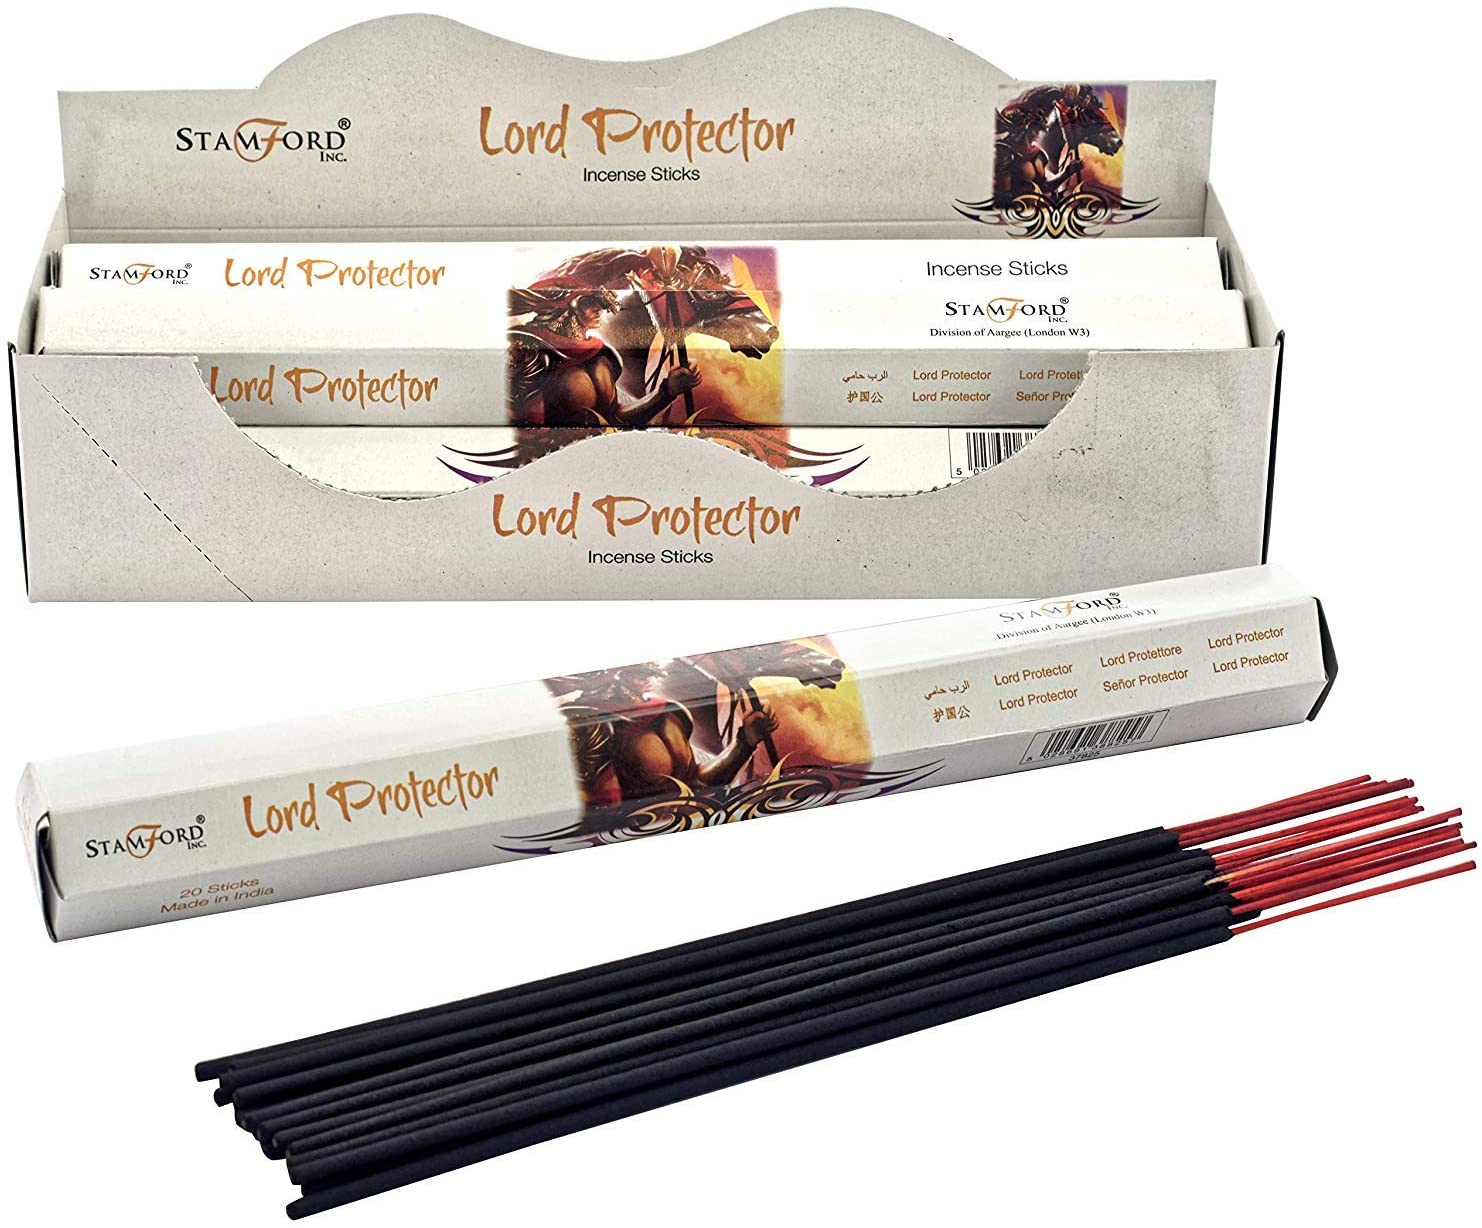 Lord Protector Incense Sticks